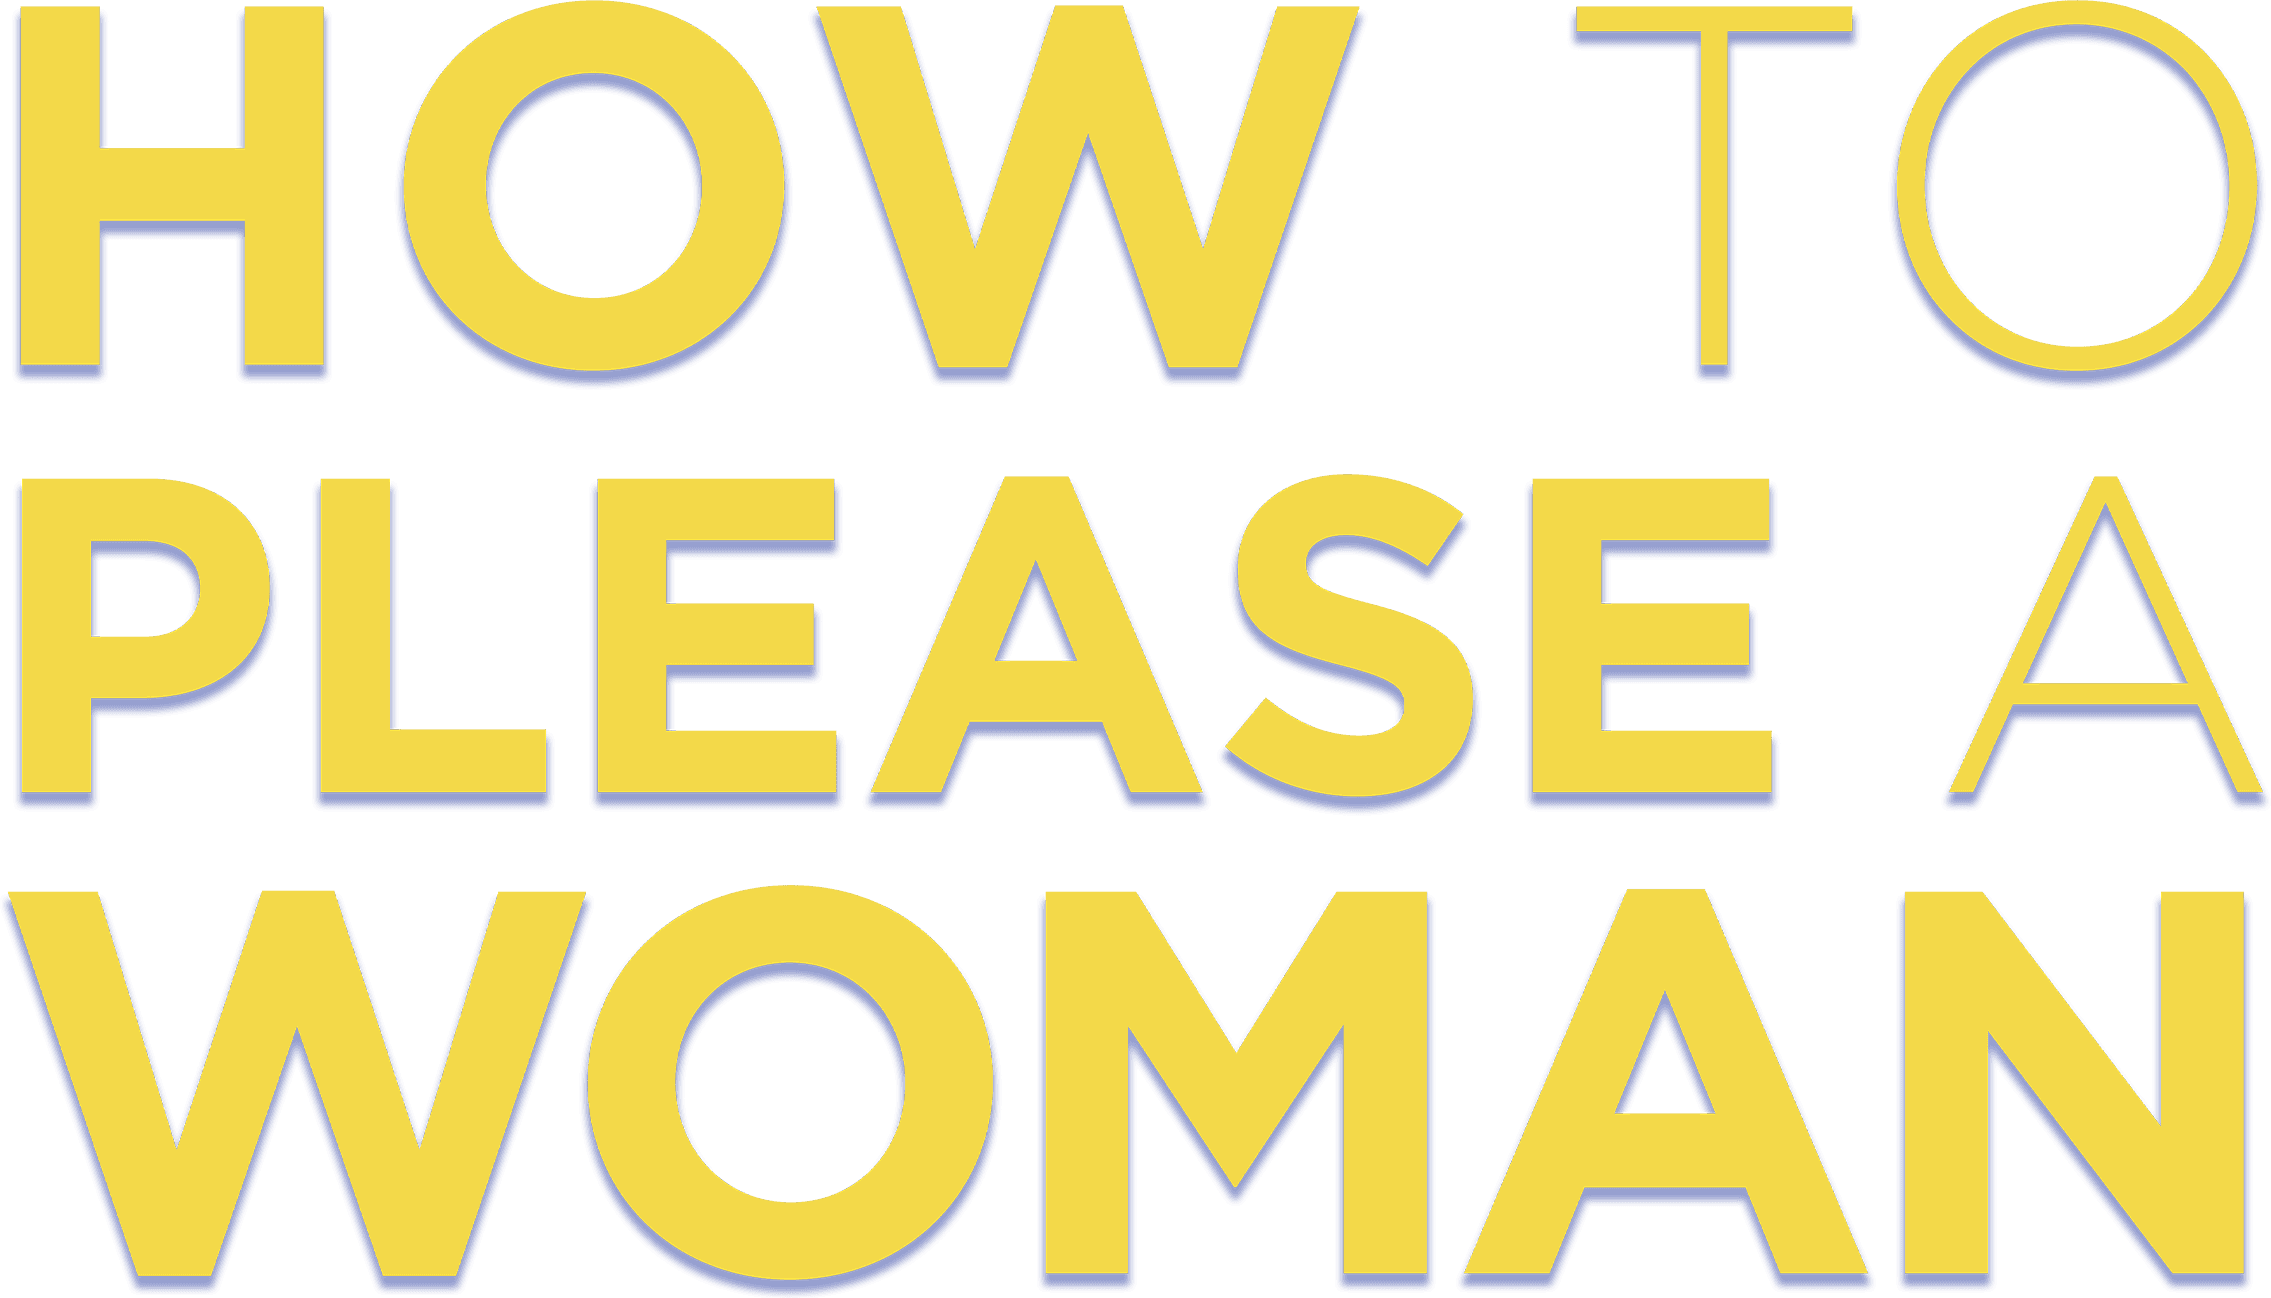 How to Please a Woman logo